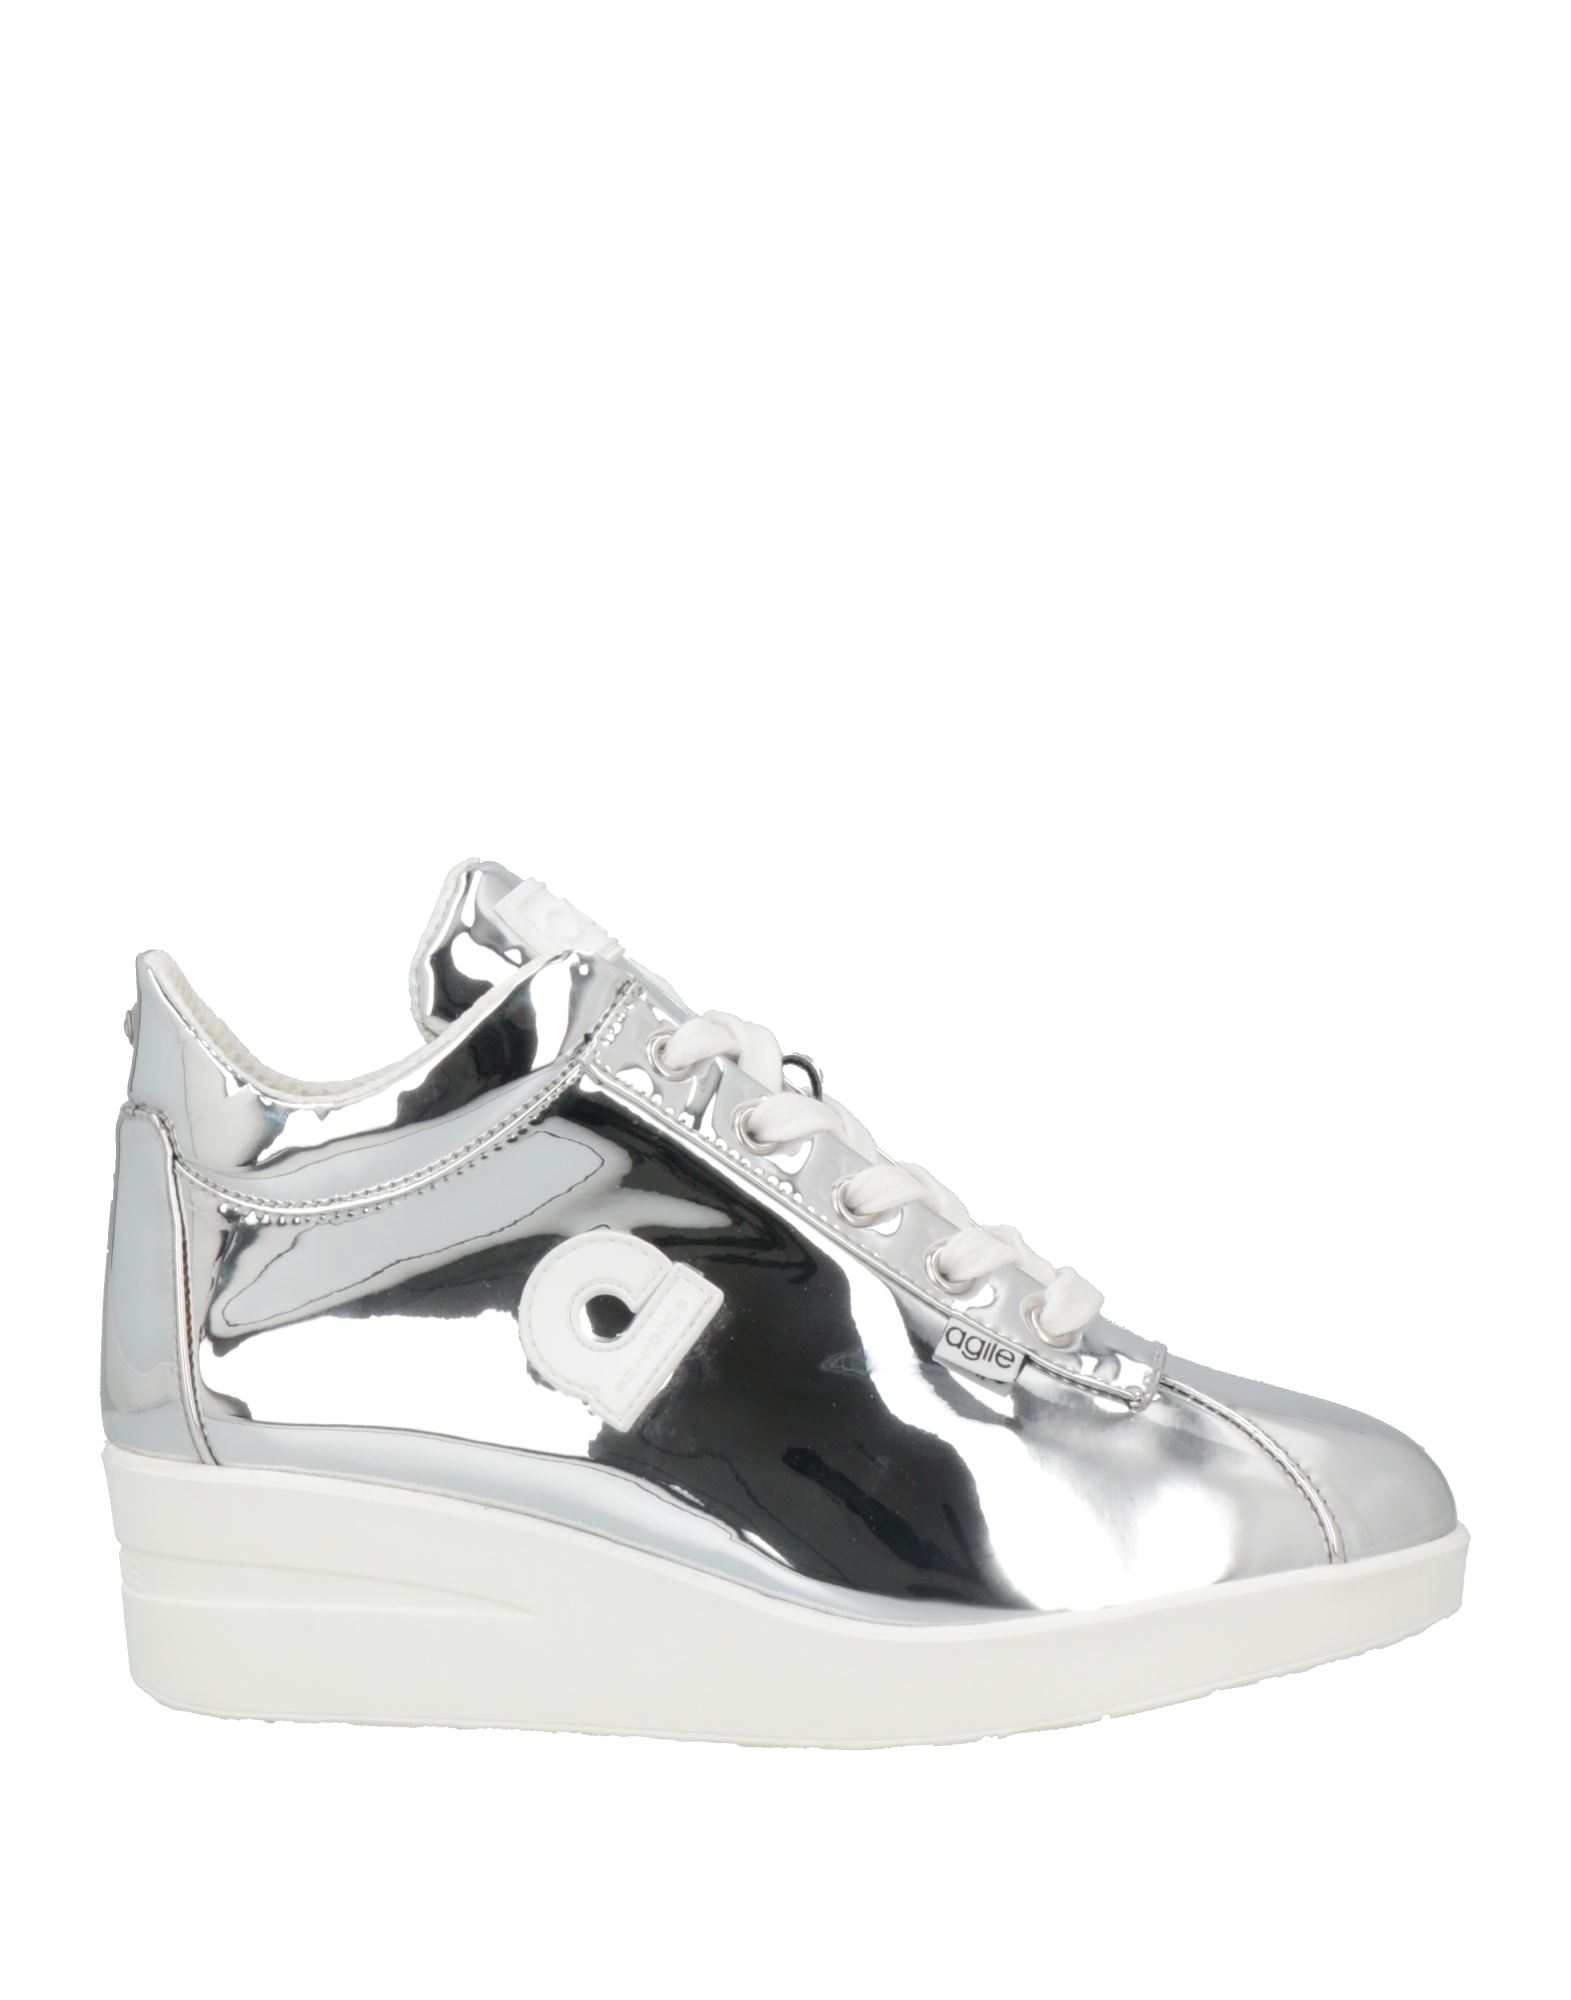 AGILE by RUCOLINE Sneakers Damen Silber von AGILE by RUCOLINE